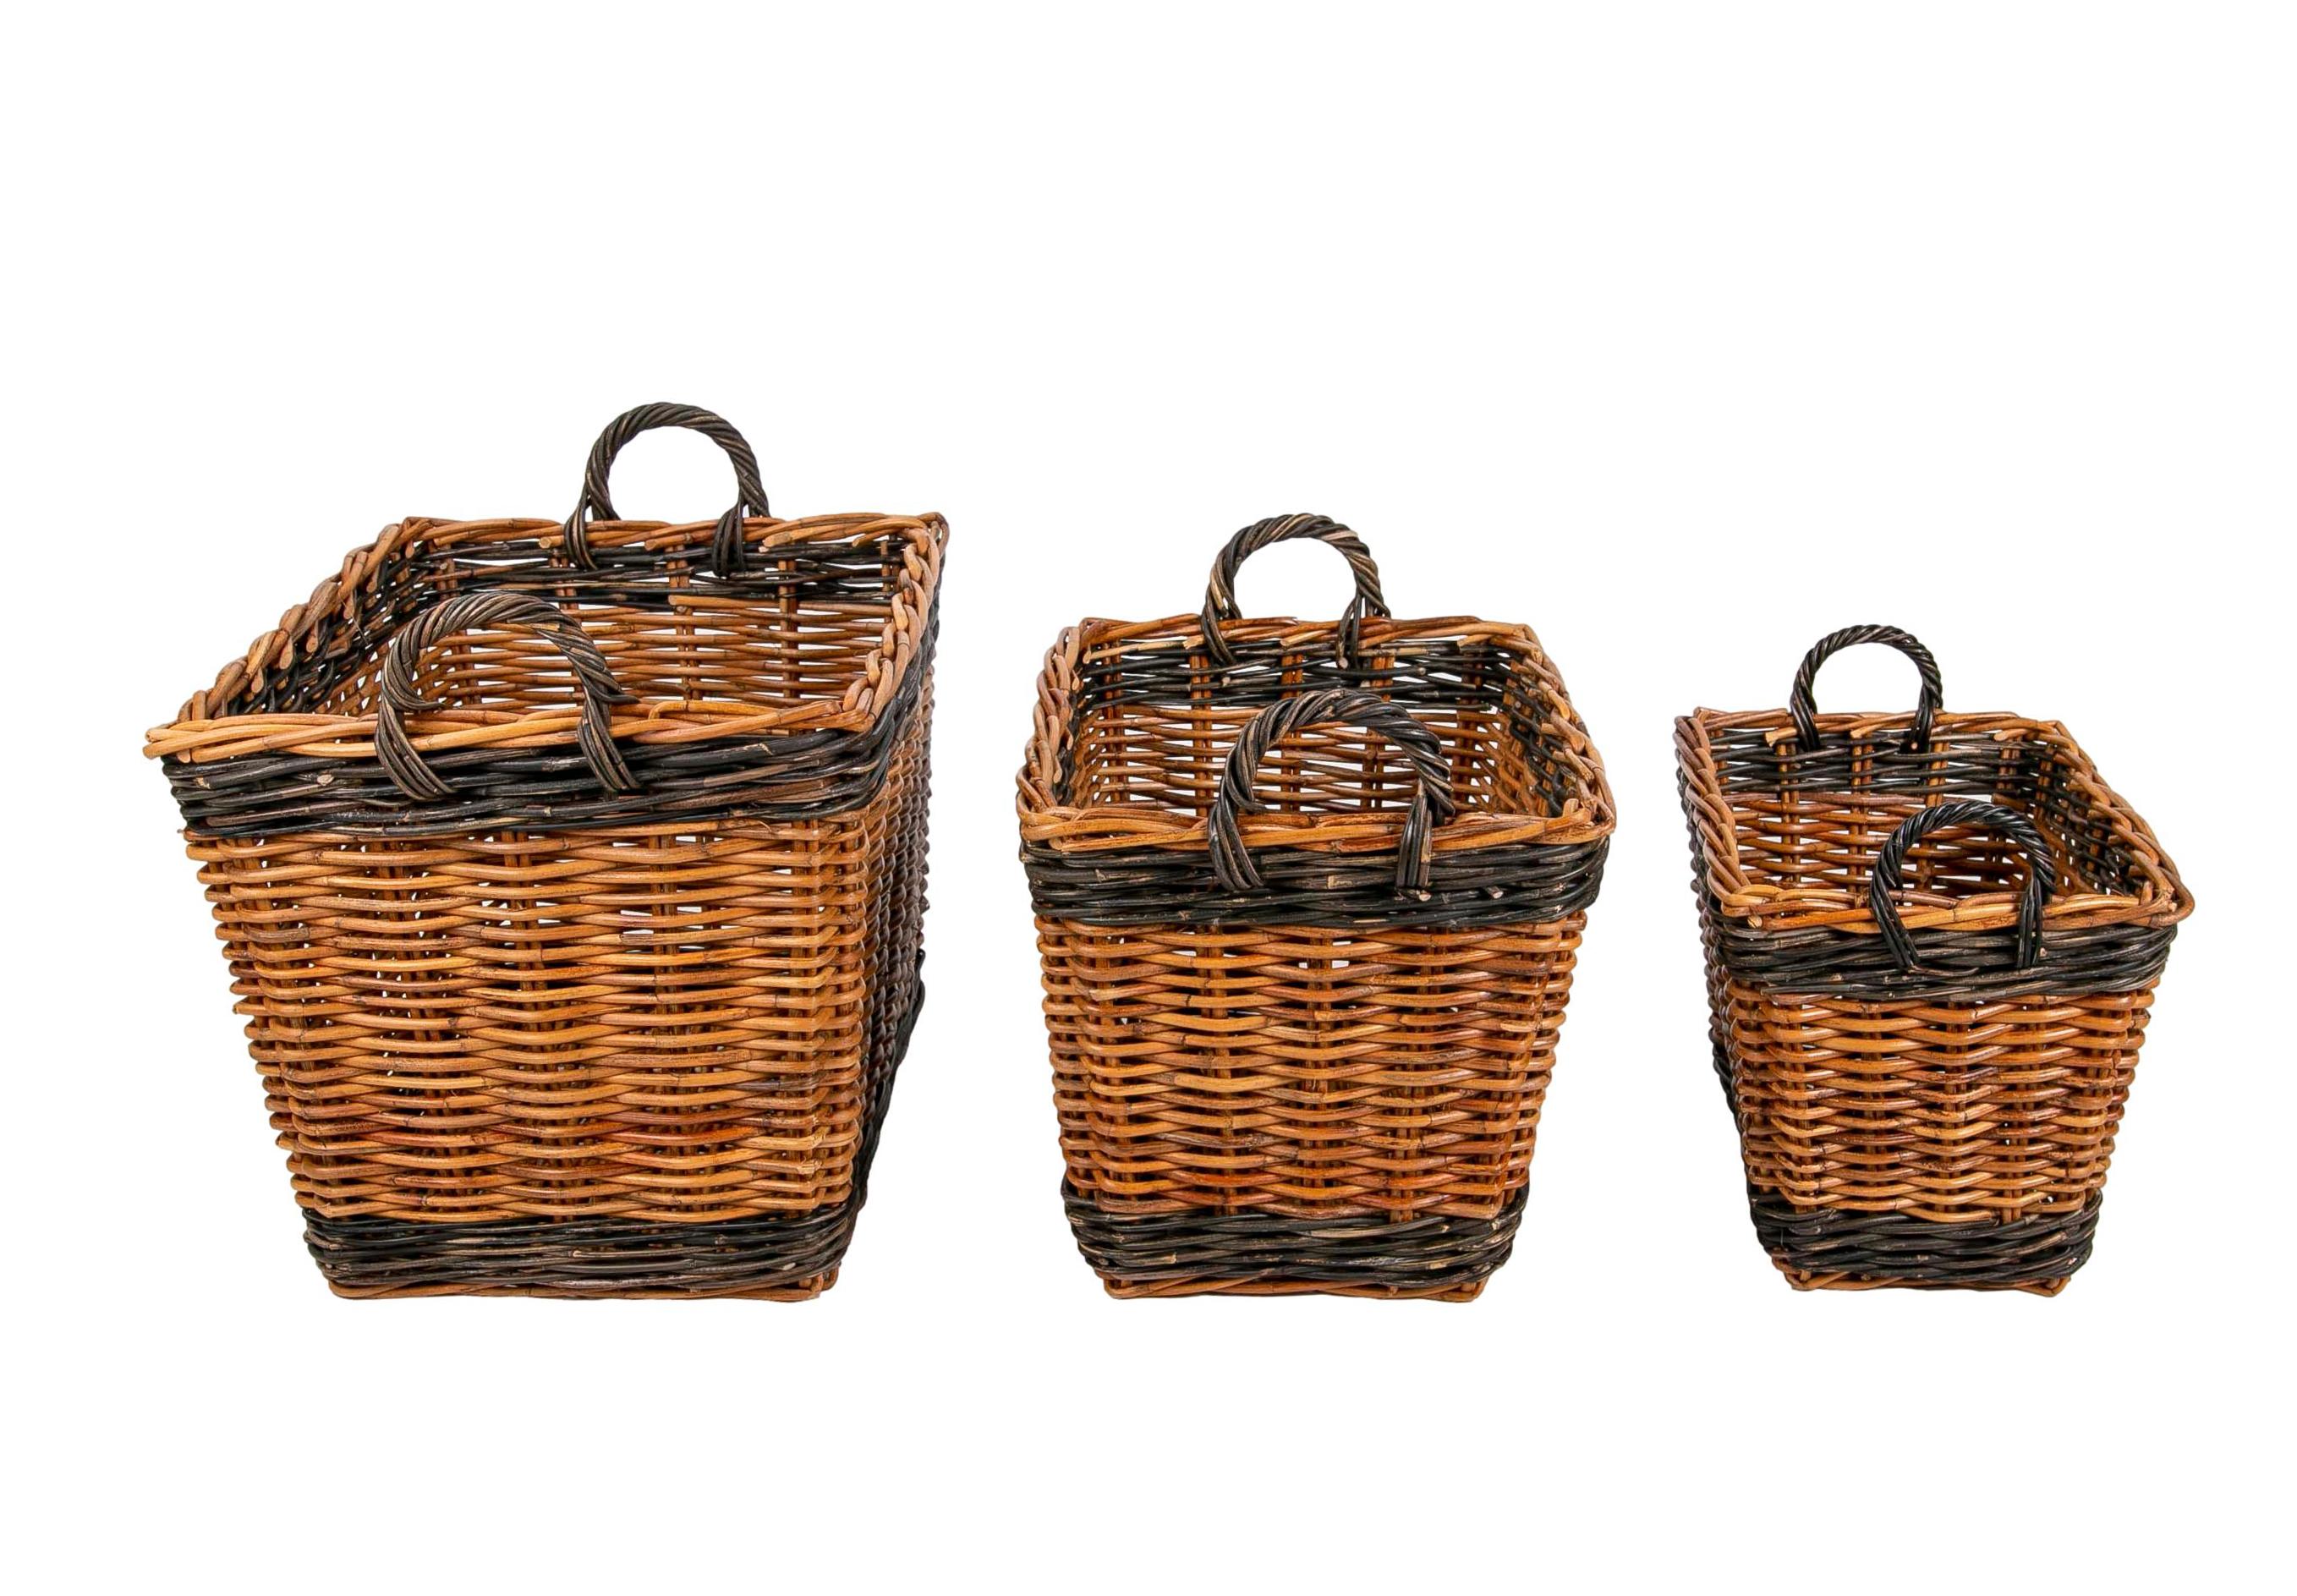 Set Consisting of Three Decorative Wicker Baskets of Different Sizes with a Green Painted Stripe

Dimensions are of the largest item